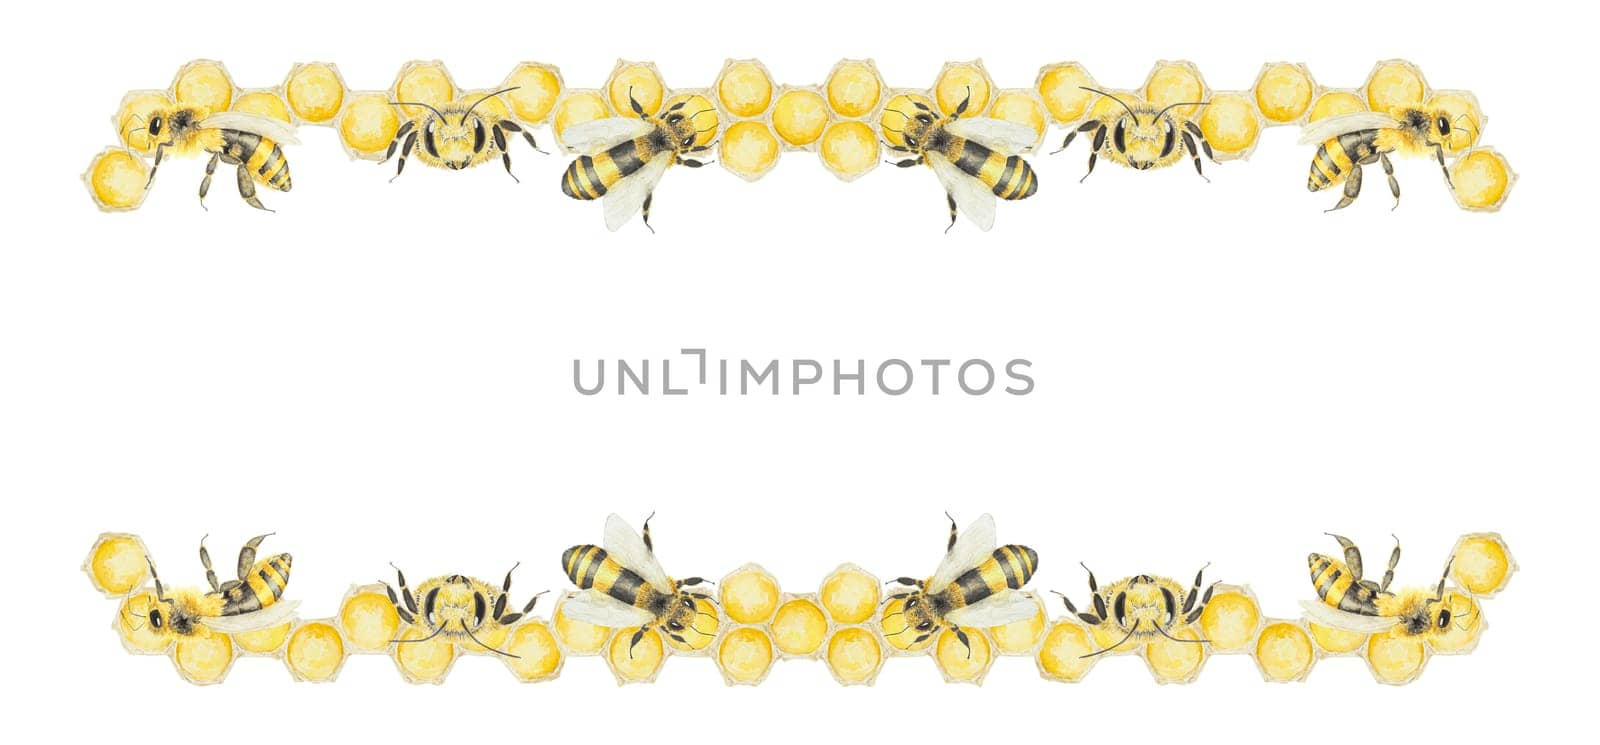 Watercolor illustration of honey and bees. Hand drawn painting isolated on white background. Great for printing on postcards, invitations, menus, cosmetics, cooking books and others.